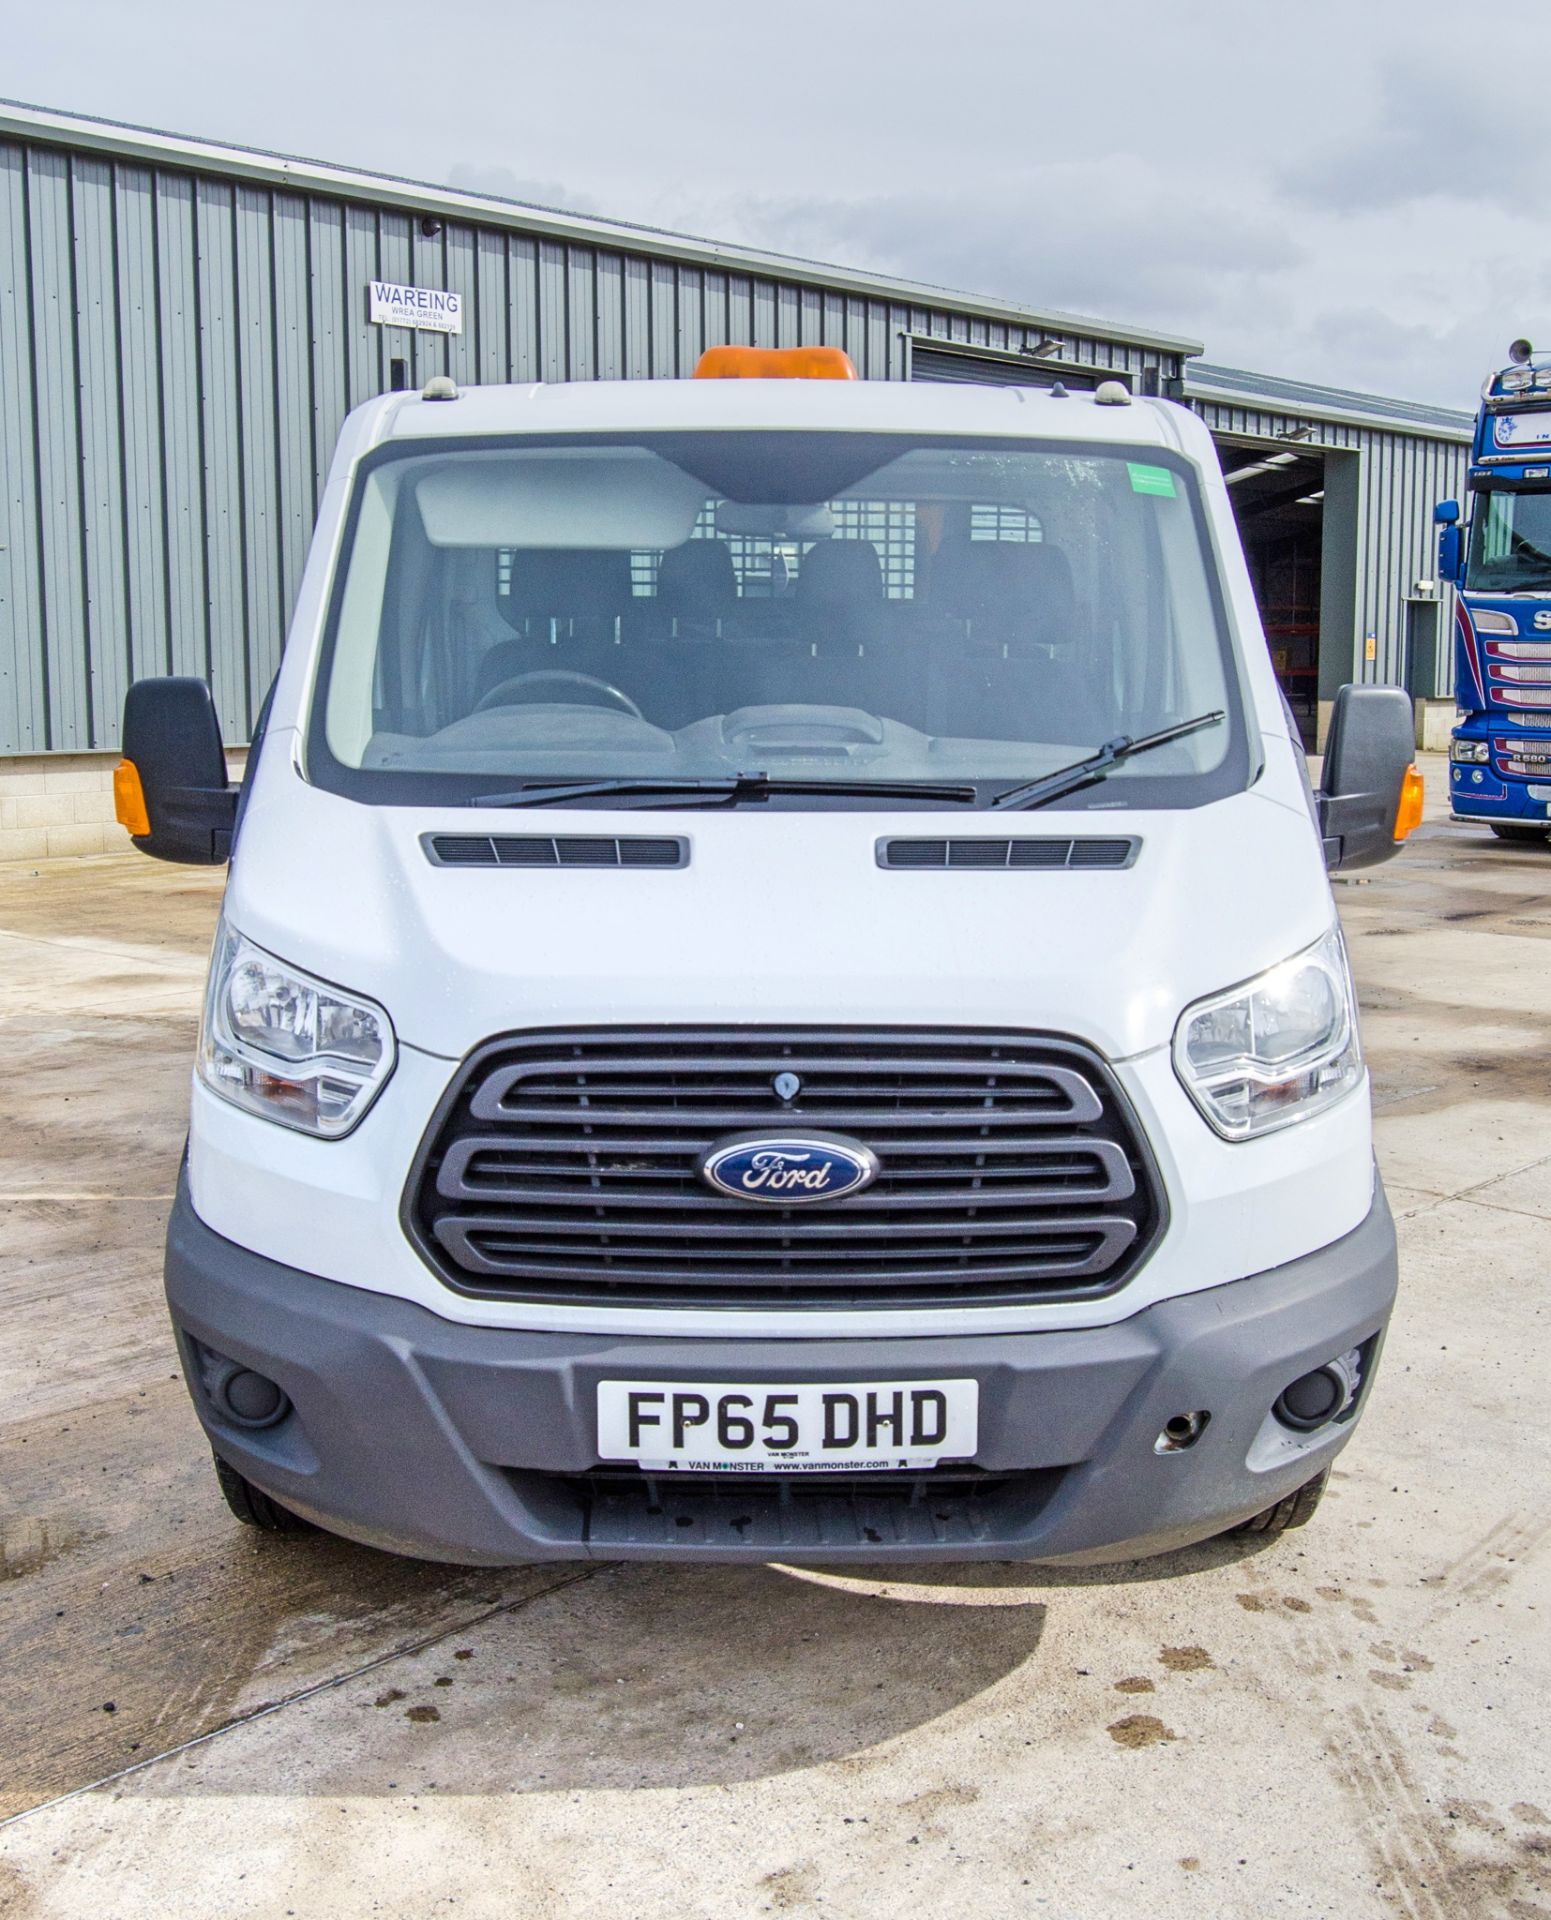 Ford Transit 350 2198cc 6 speed manual crew cab tipper  Registration Number: FP65 DHD Date of - Image 5 of 35